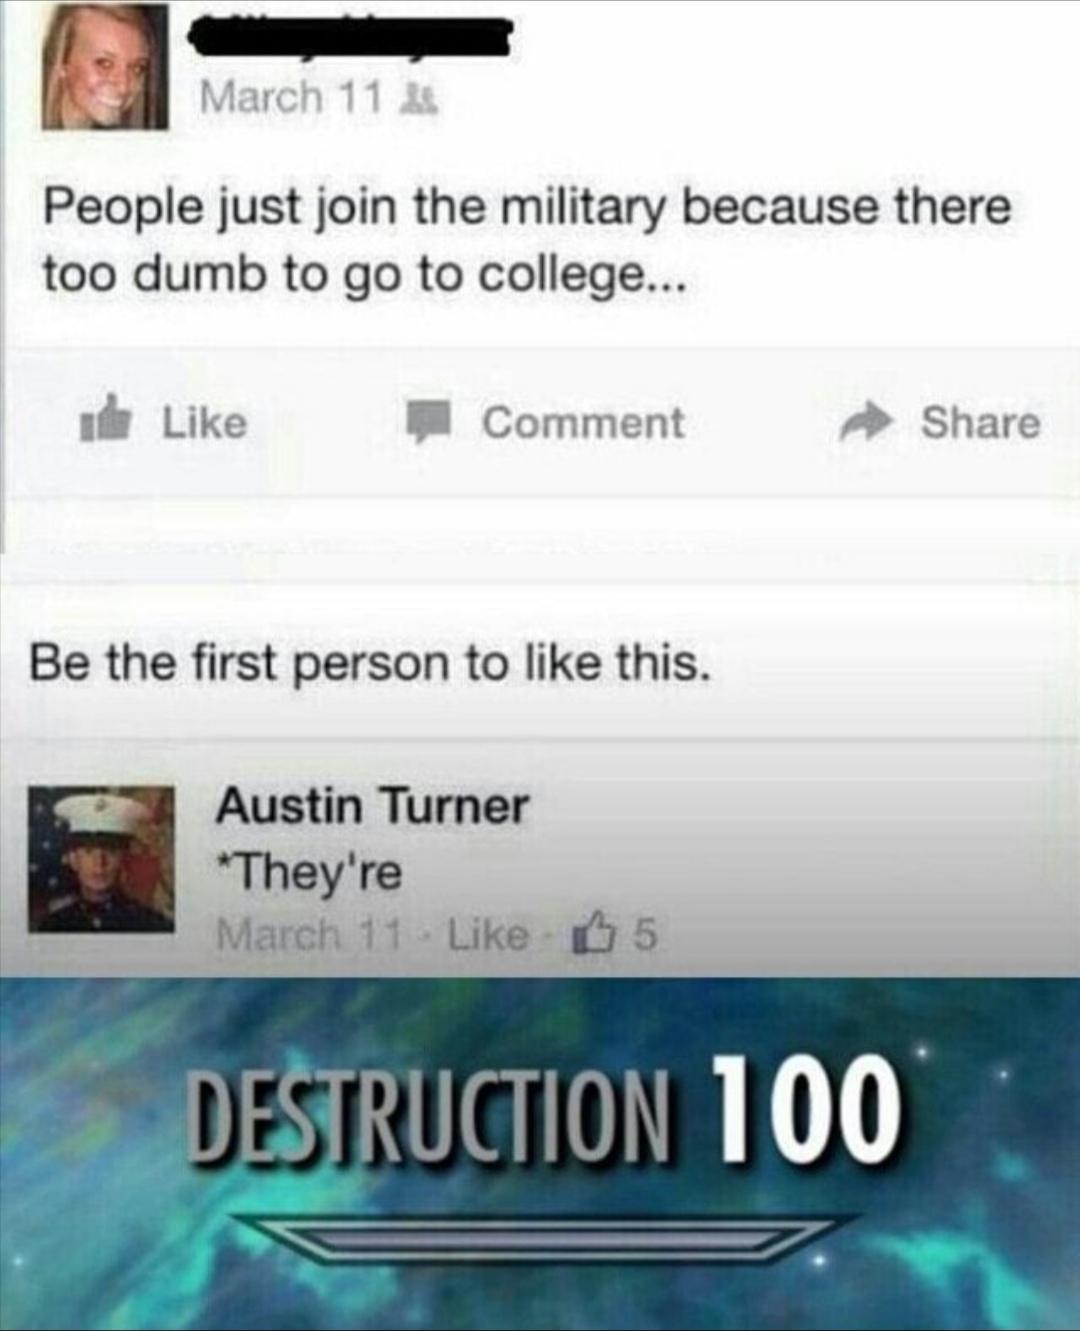 skyrim destruction meme - March 11 4 People just join the military because there too dumb to go to college... de Comment Be the first person to this. Austin Turner They're March 11. 5 Destruction 100